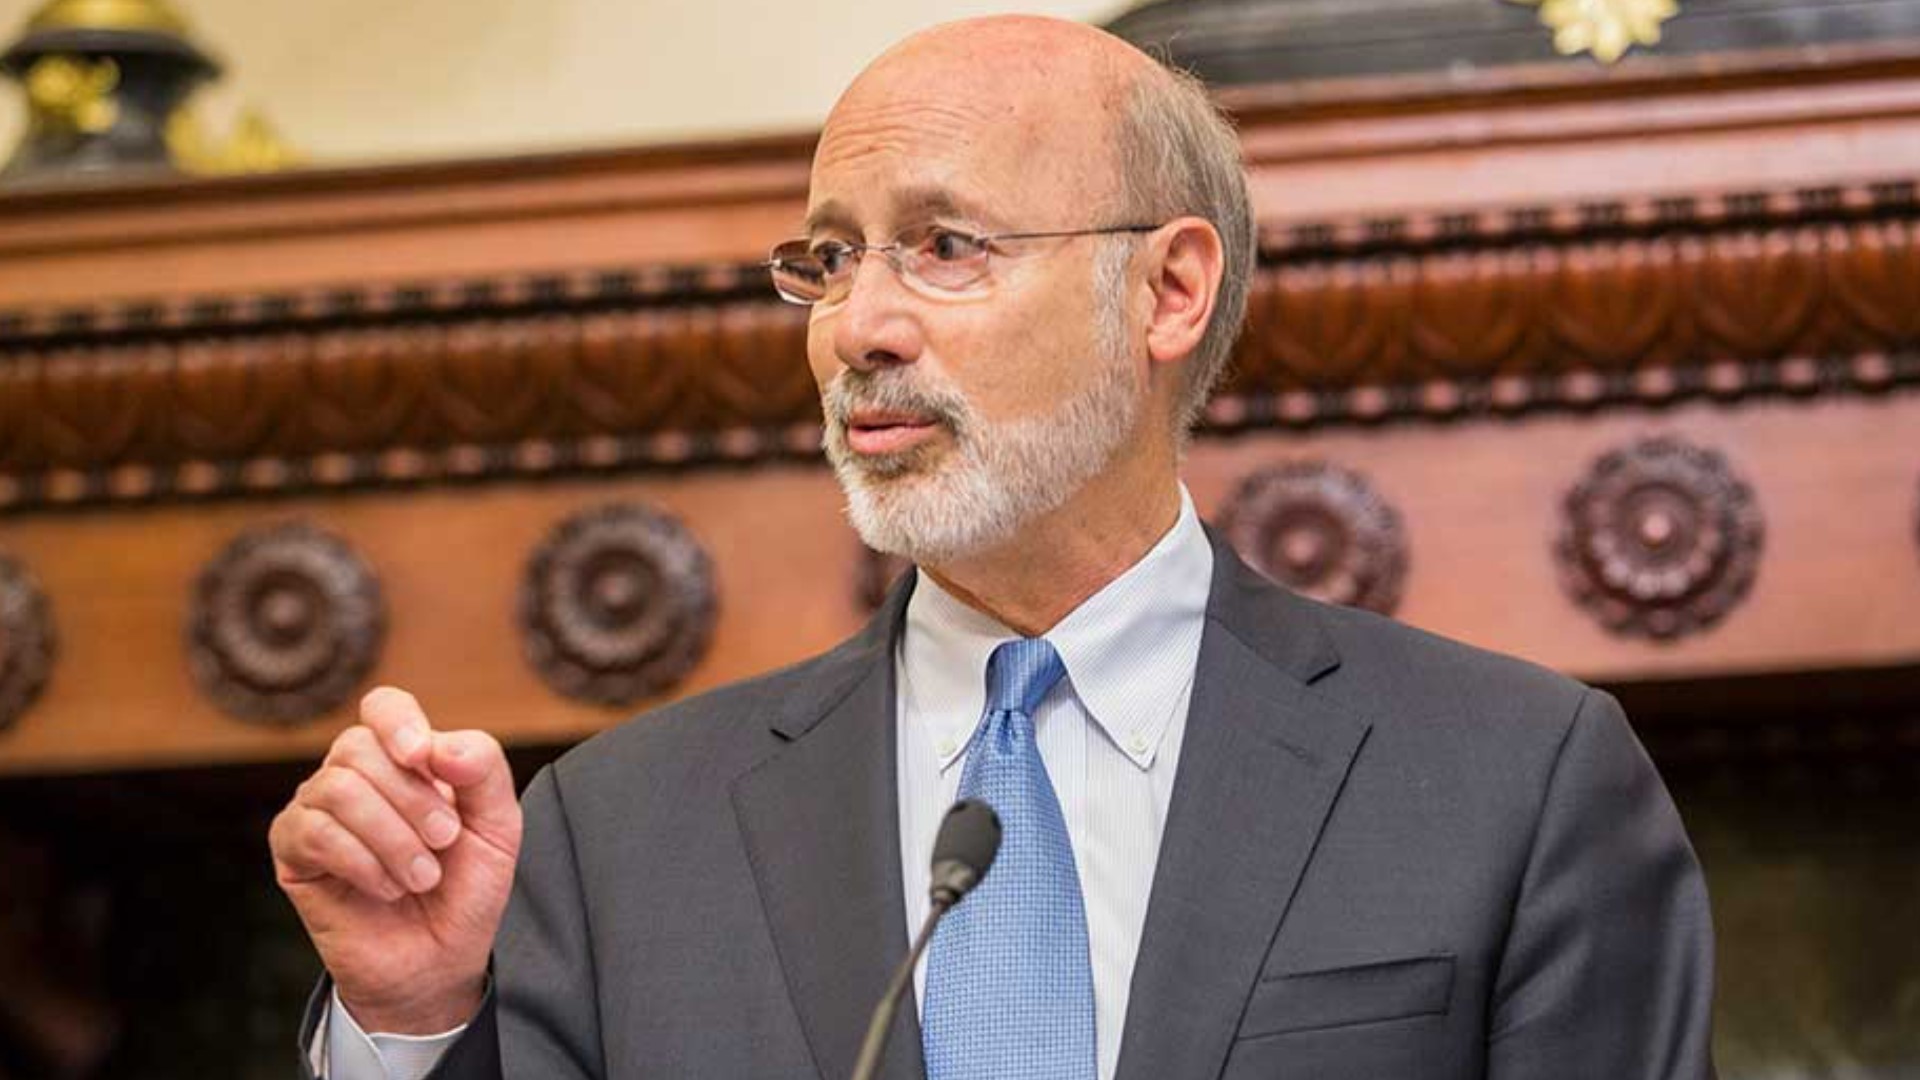 Governor Tom Wolf and Secretary of State Kathy Boockvar remind Pennsylvanians that October 27 is the deadline to apply for a mail or absentee ballot